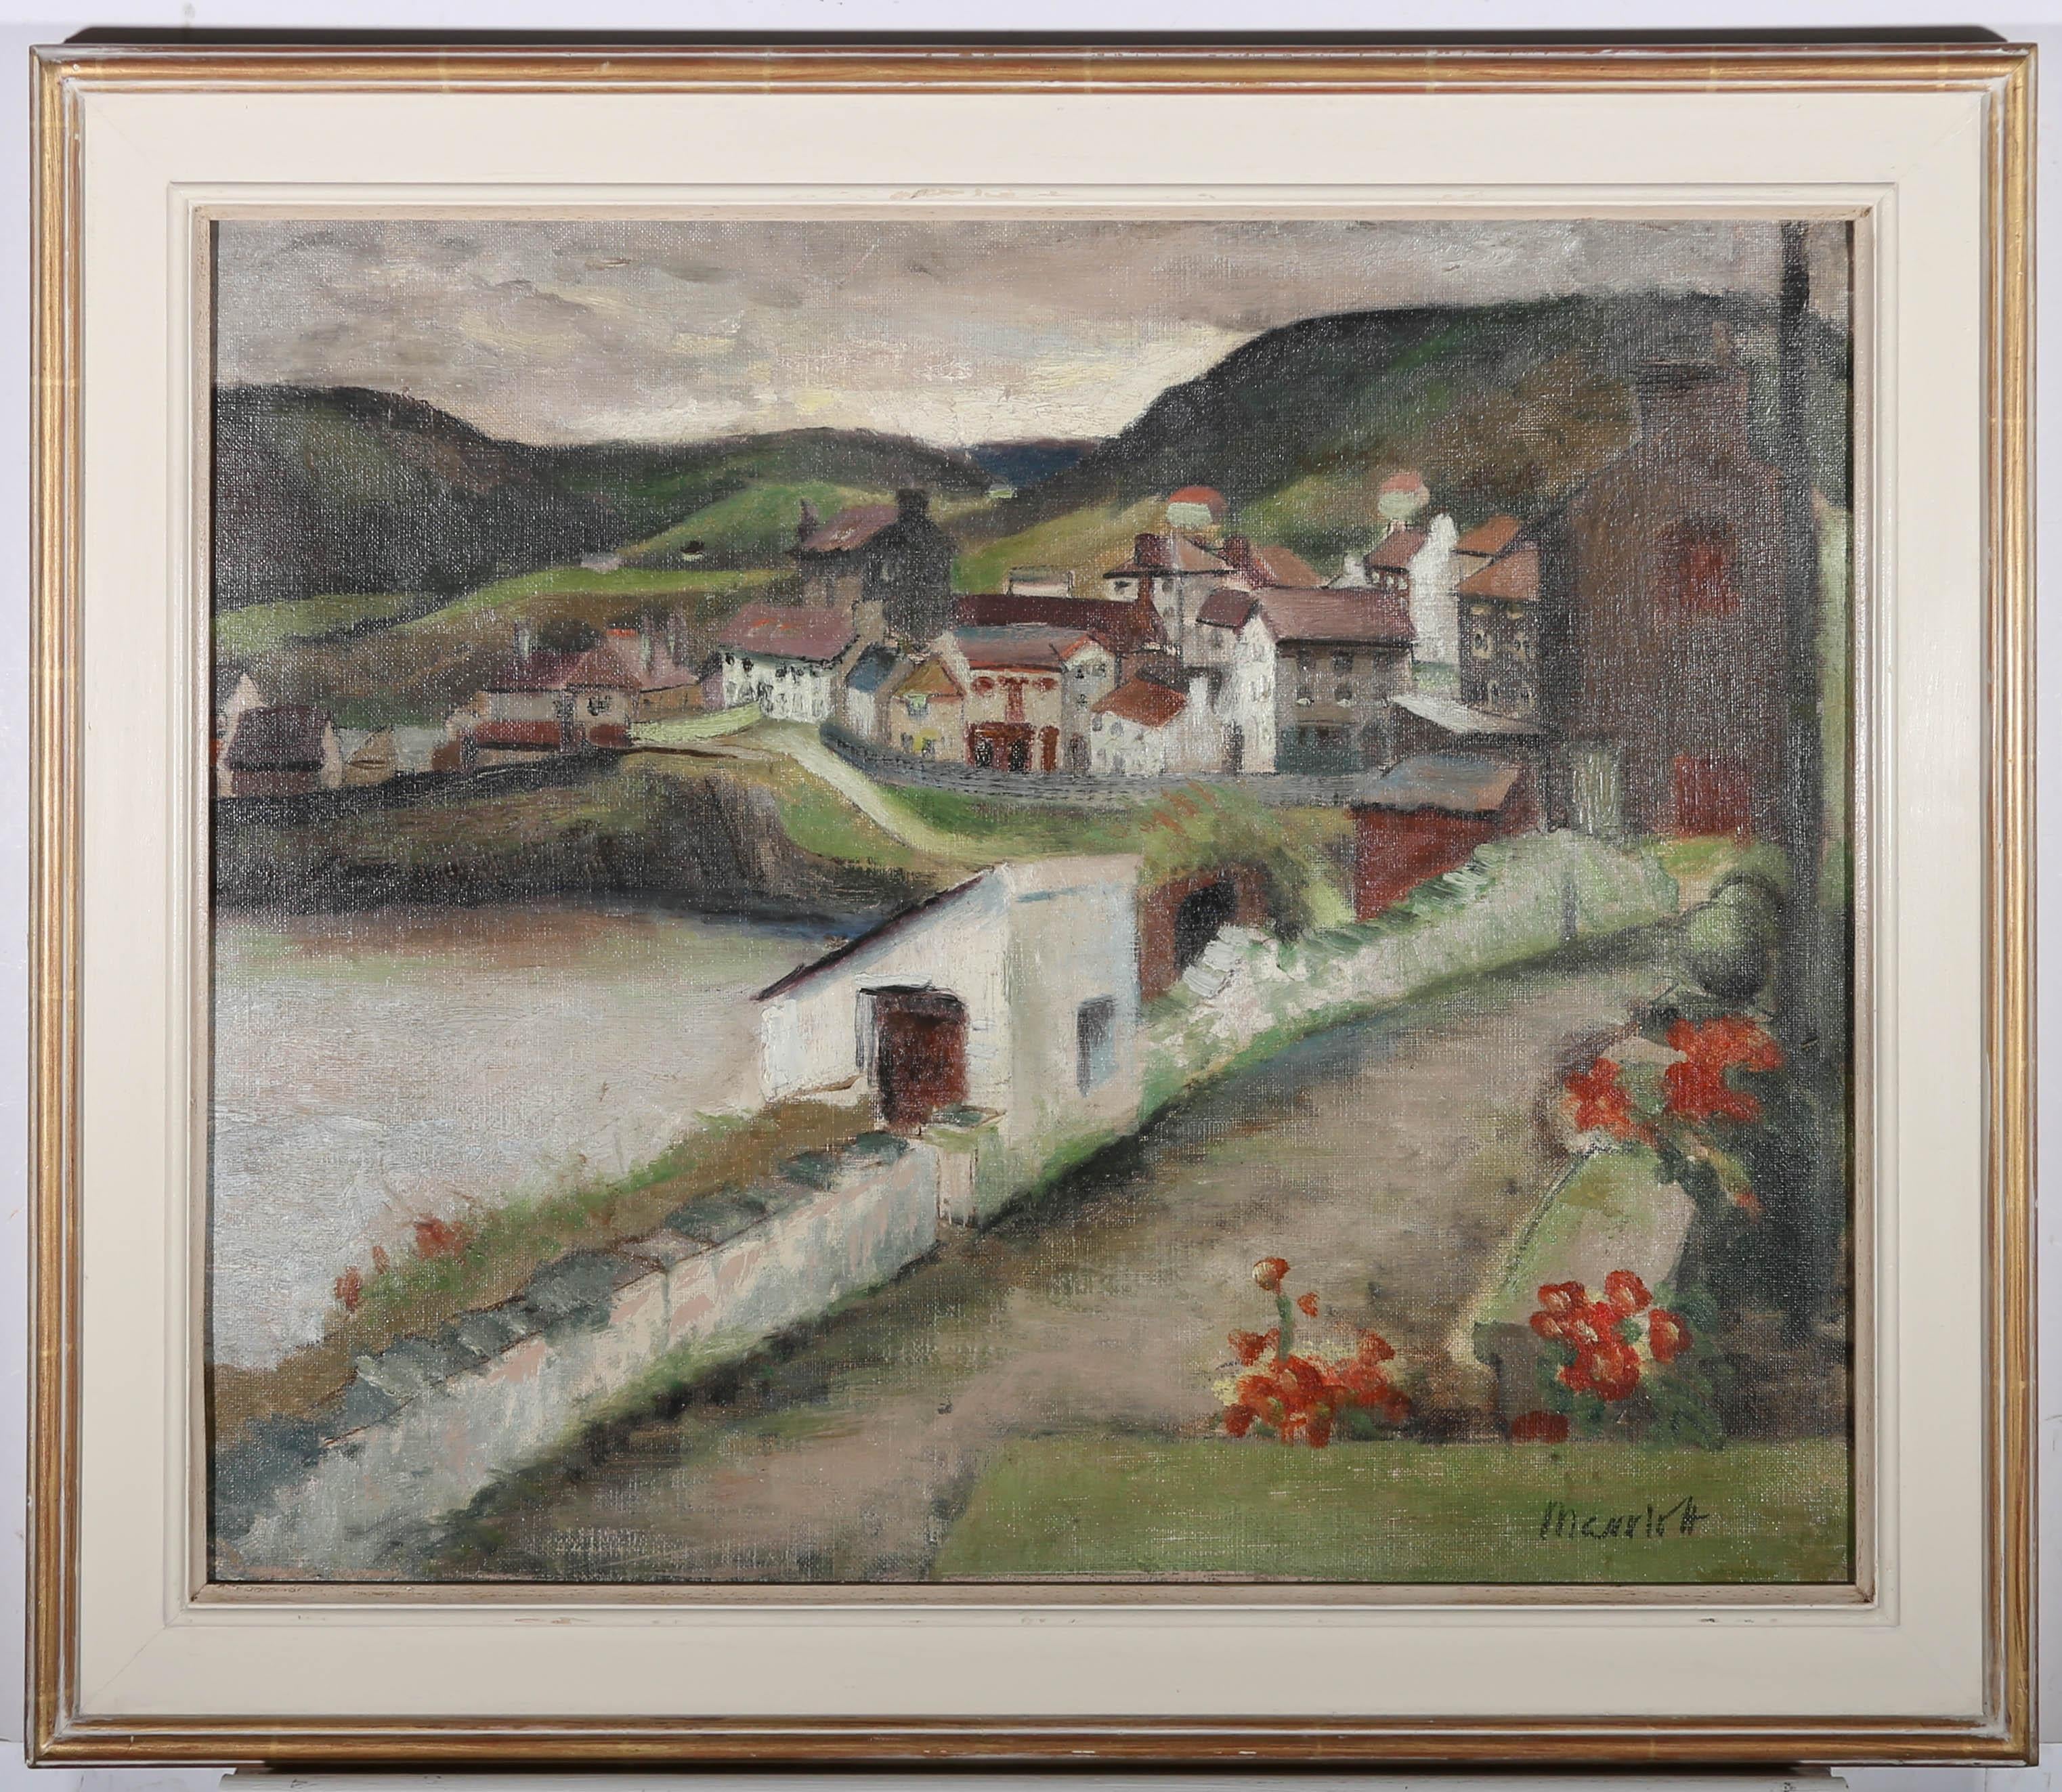 A charmingly naive oil scene showing a quaint village nestled on the banks of a river in rolling green valleys. The artist has used a muted palette with reds and greens bringing life to the buildings. The artist has signed to the lower right corner